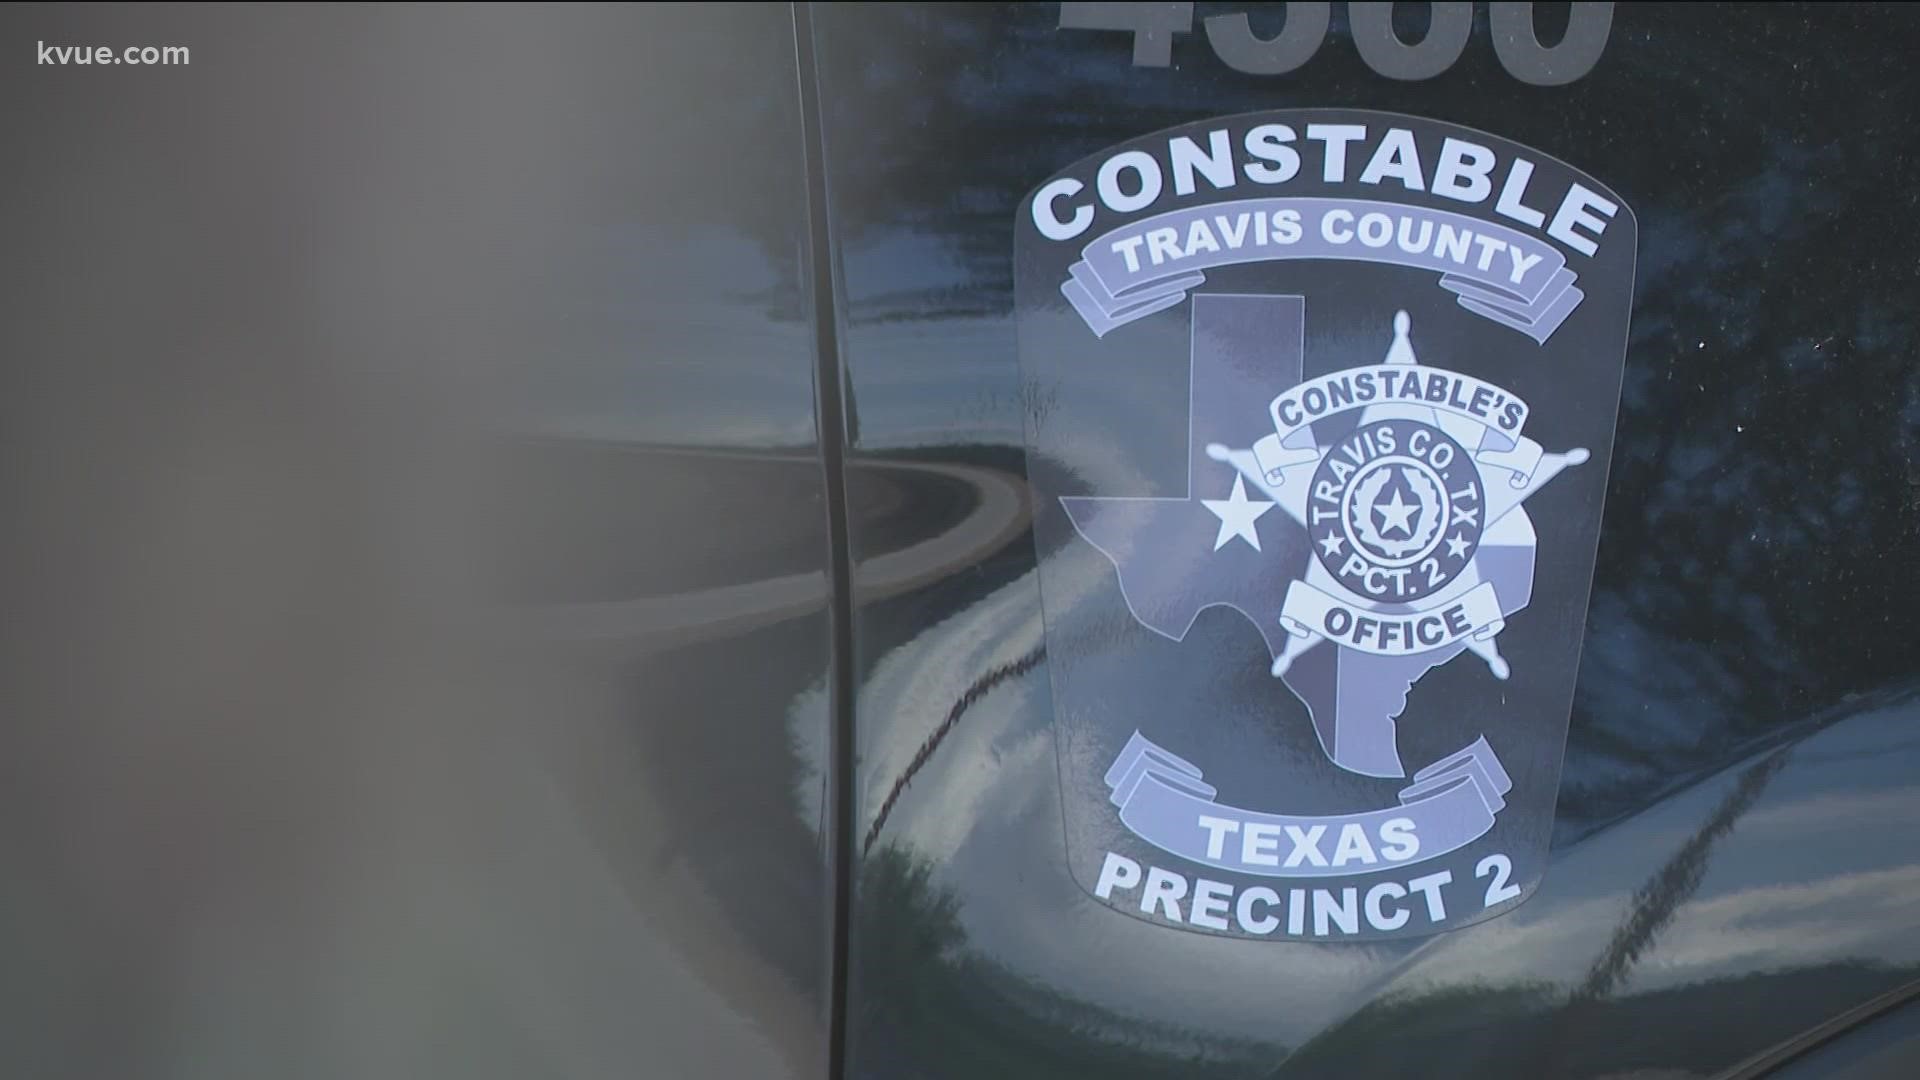 Some county constables are hoping to help proactively stop traffic incidents by increasing law enforcement presence on roadways.